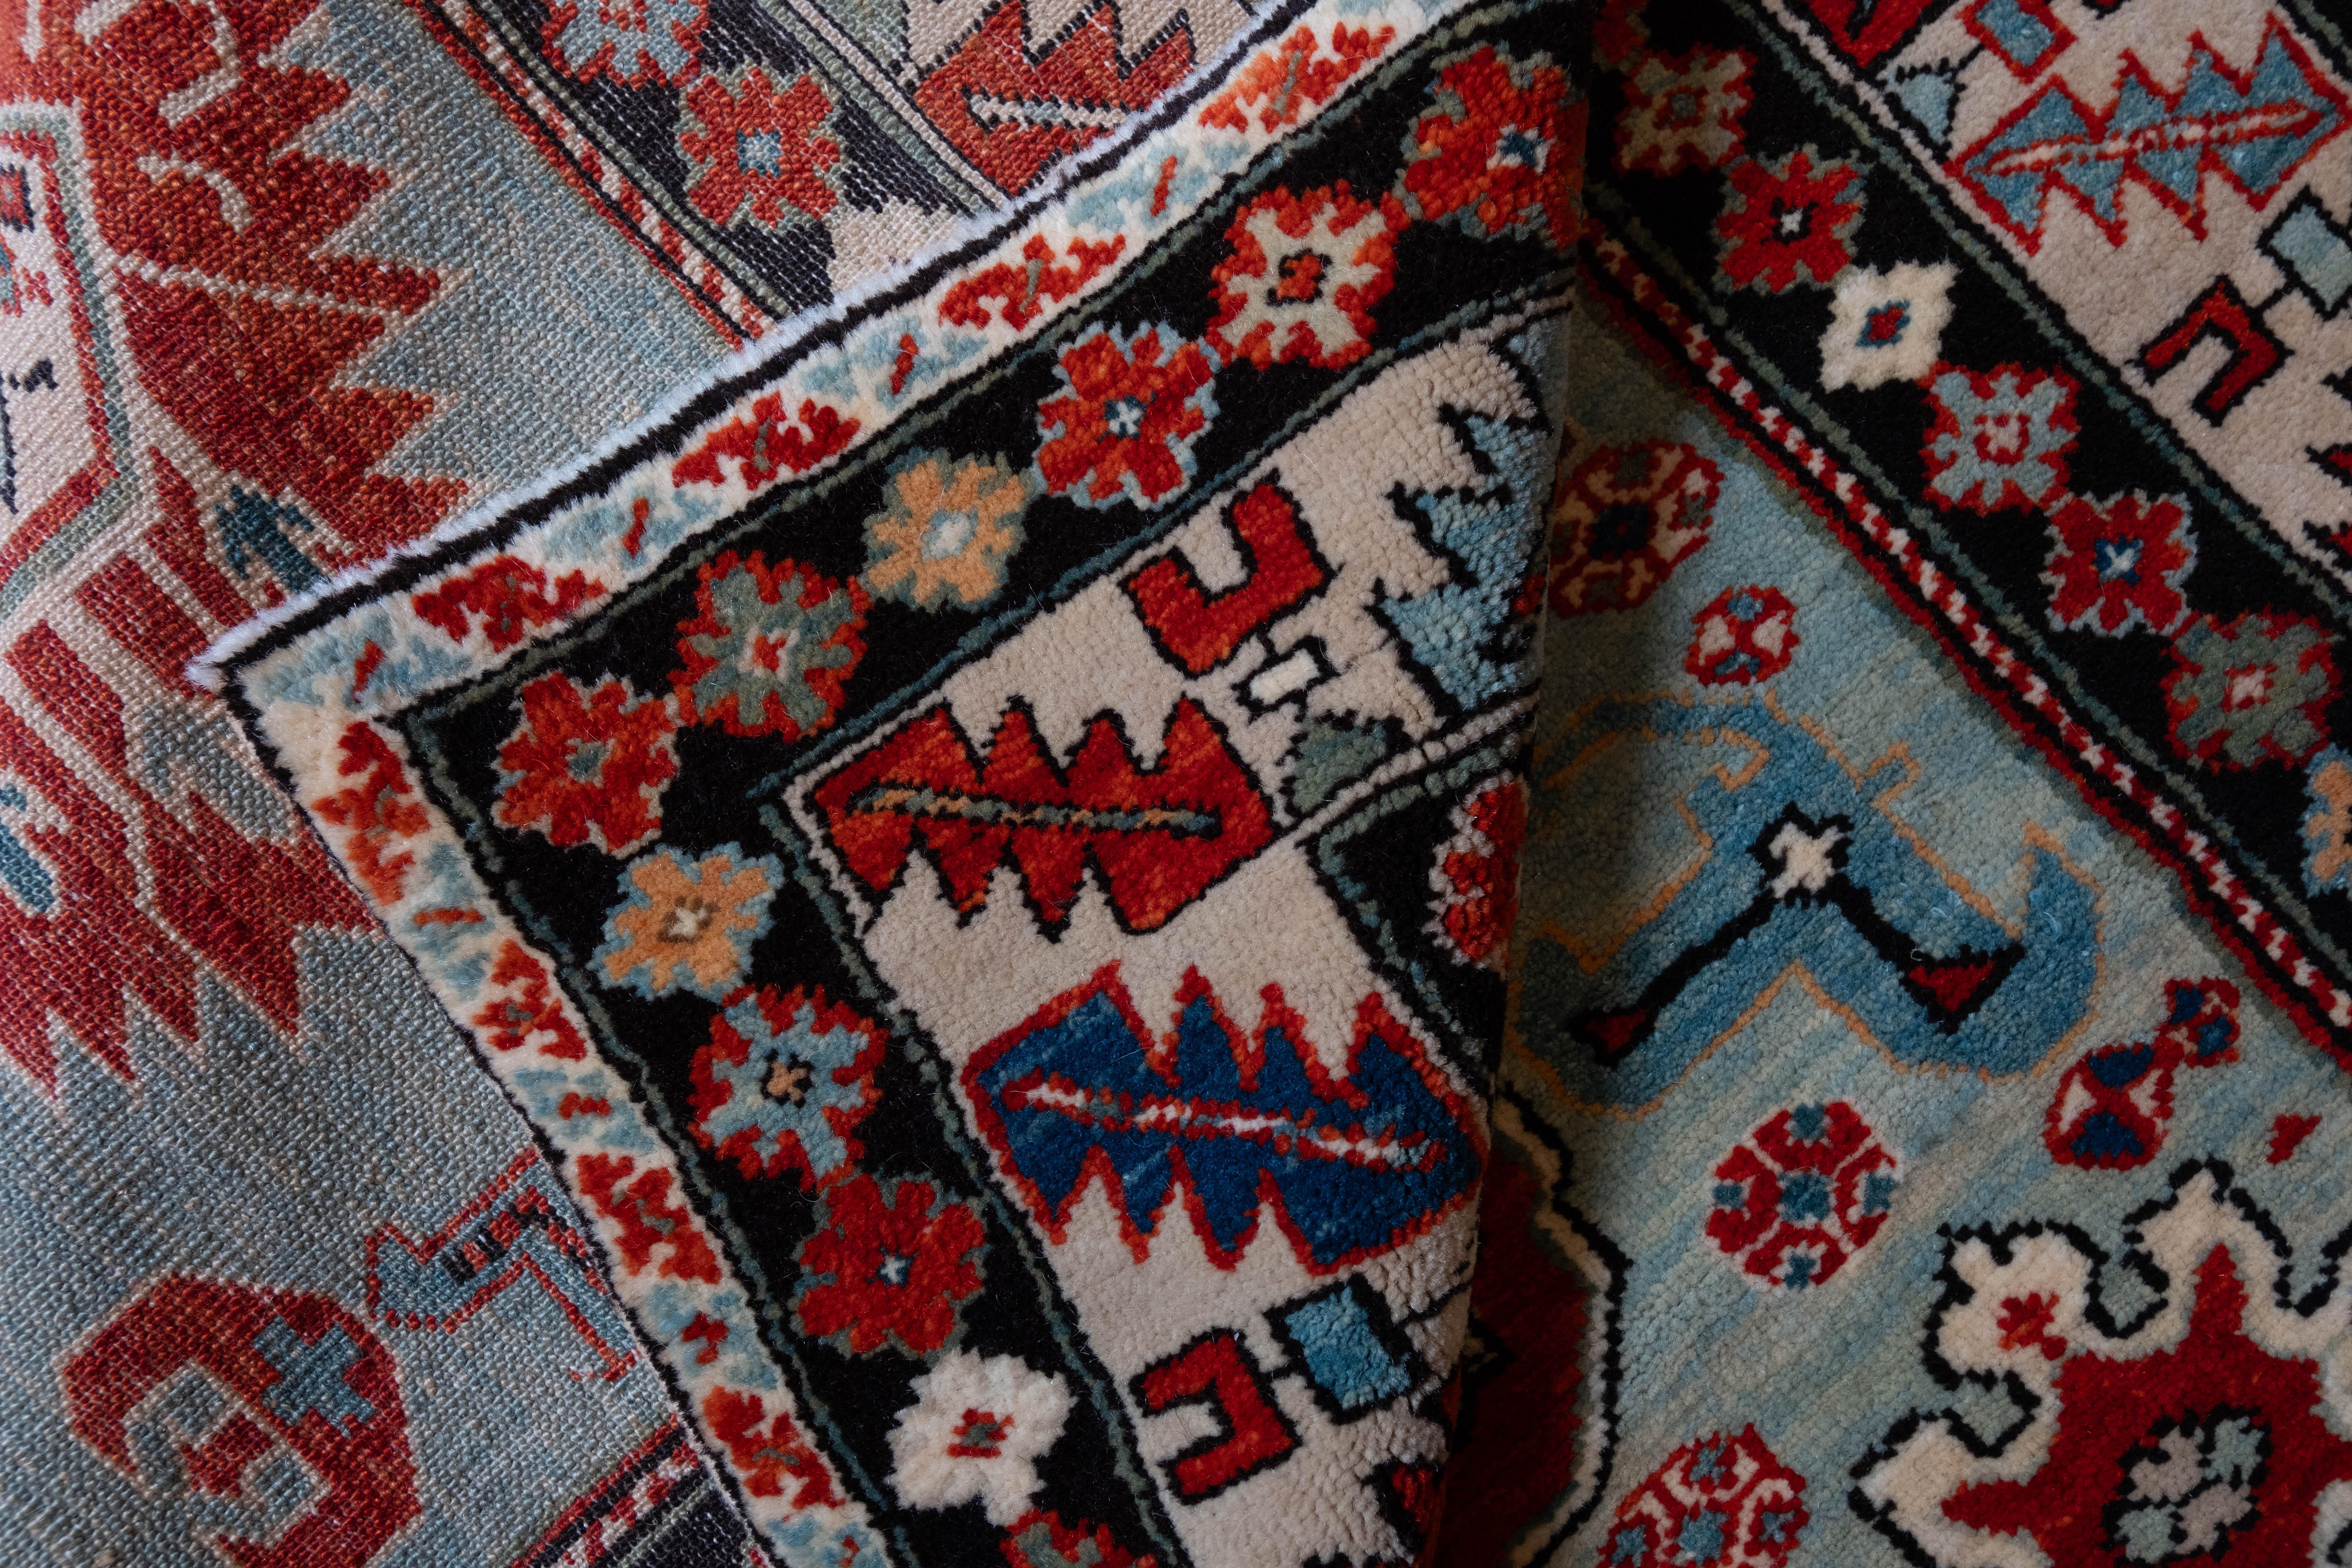 Turkish Ararat Rugs Kuba Rug with Palmettes Caucasian 19th C. Revival Rug, Natural Dyed For Sale